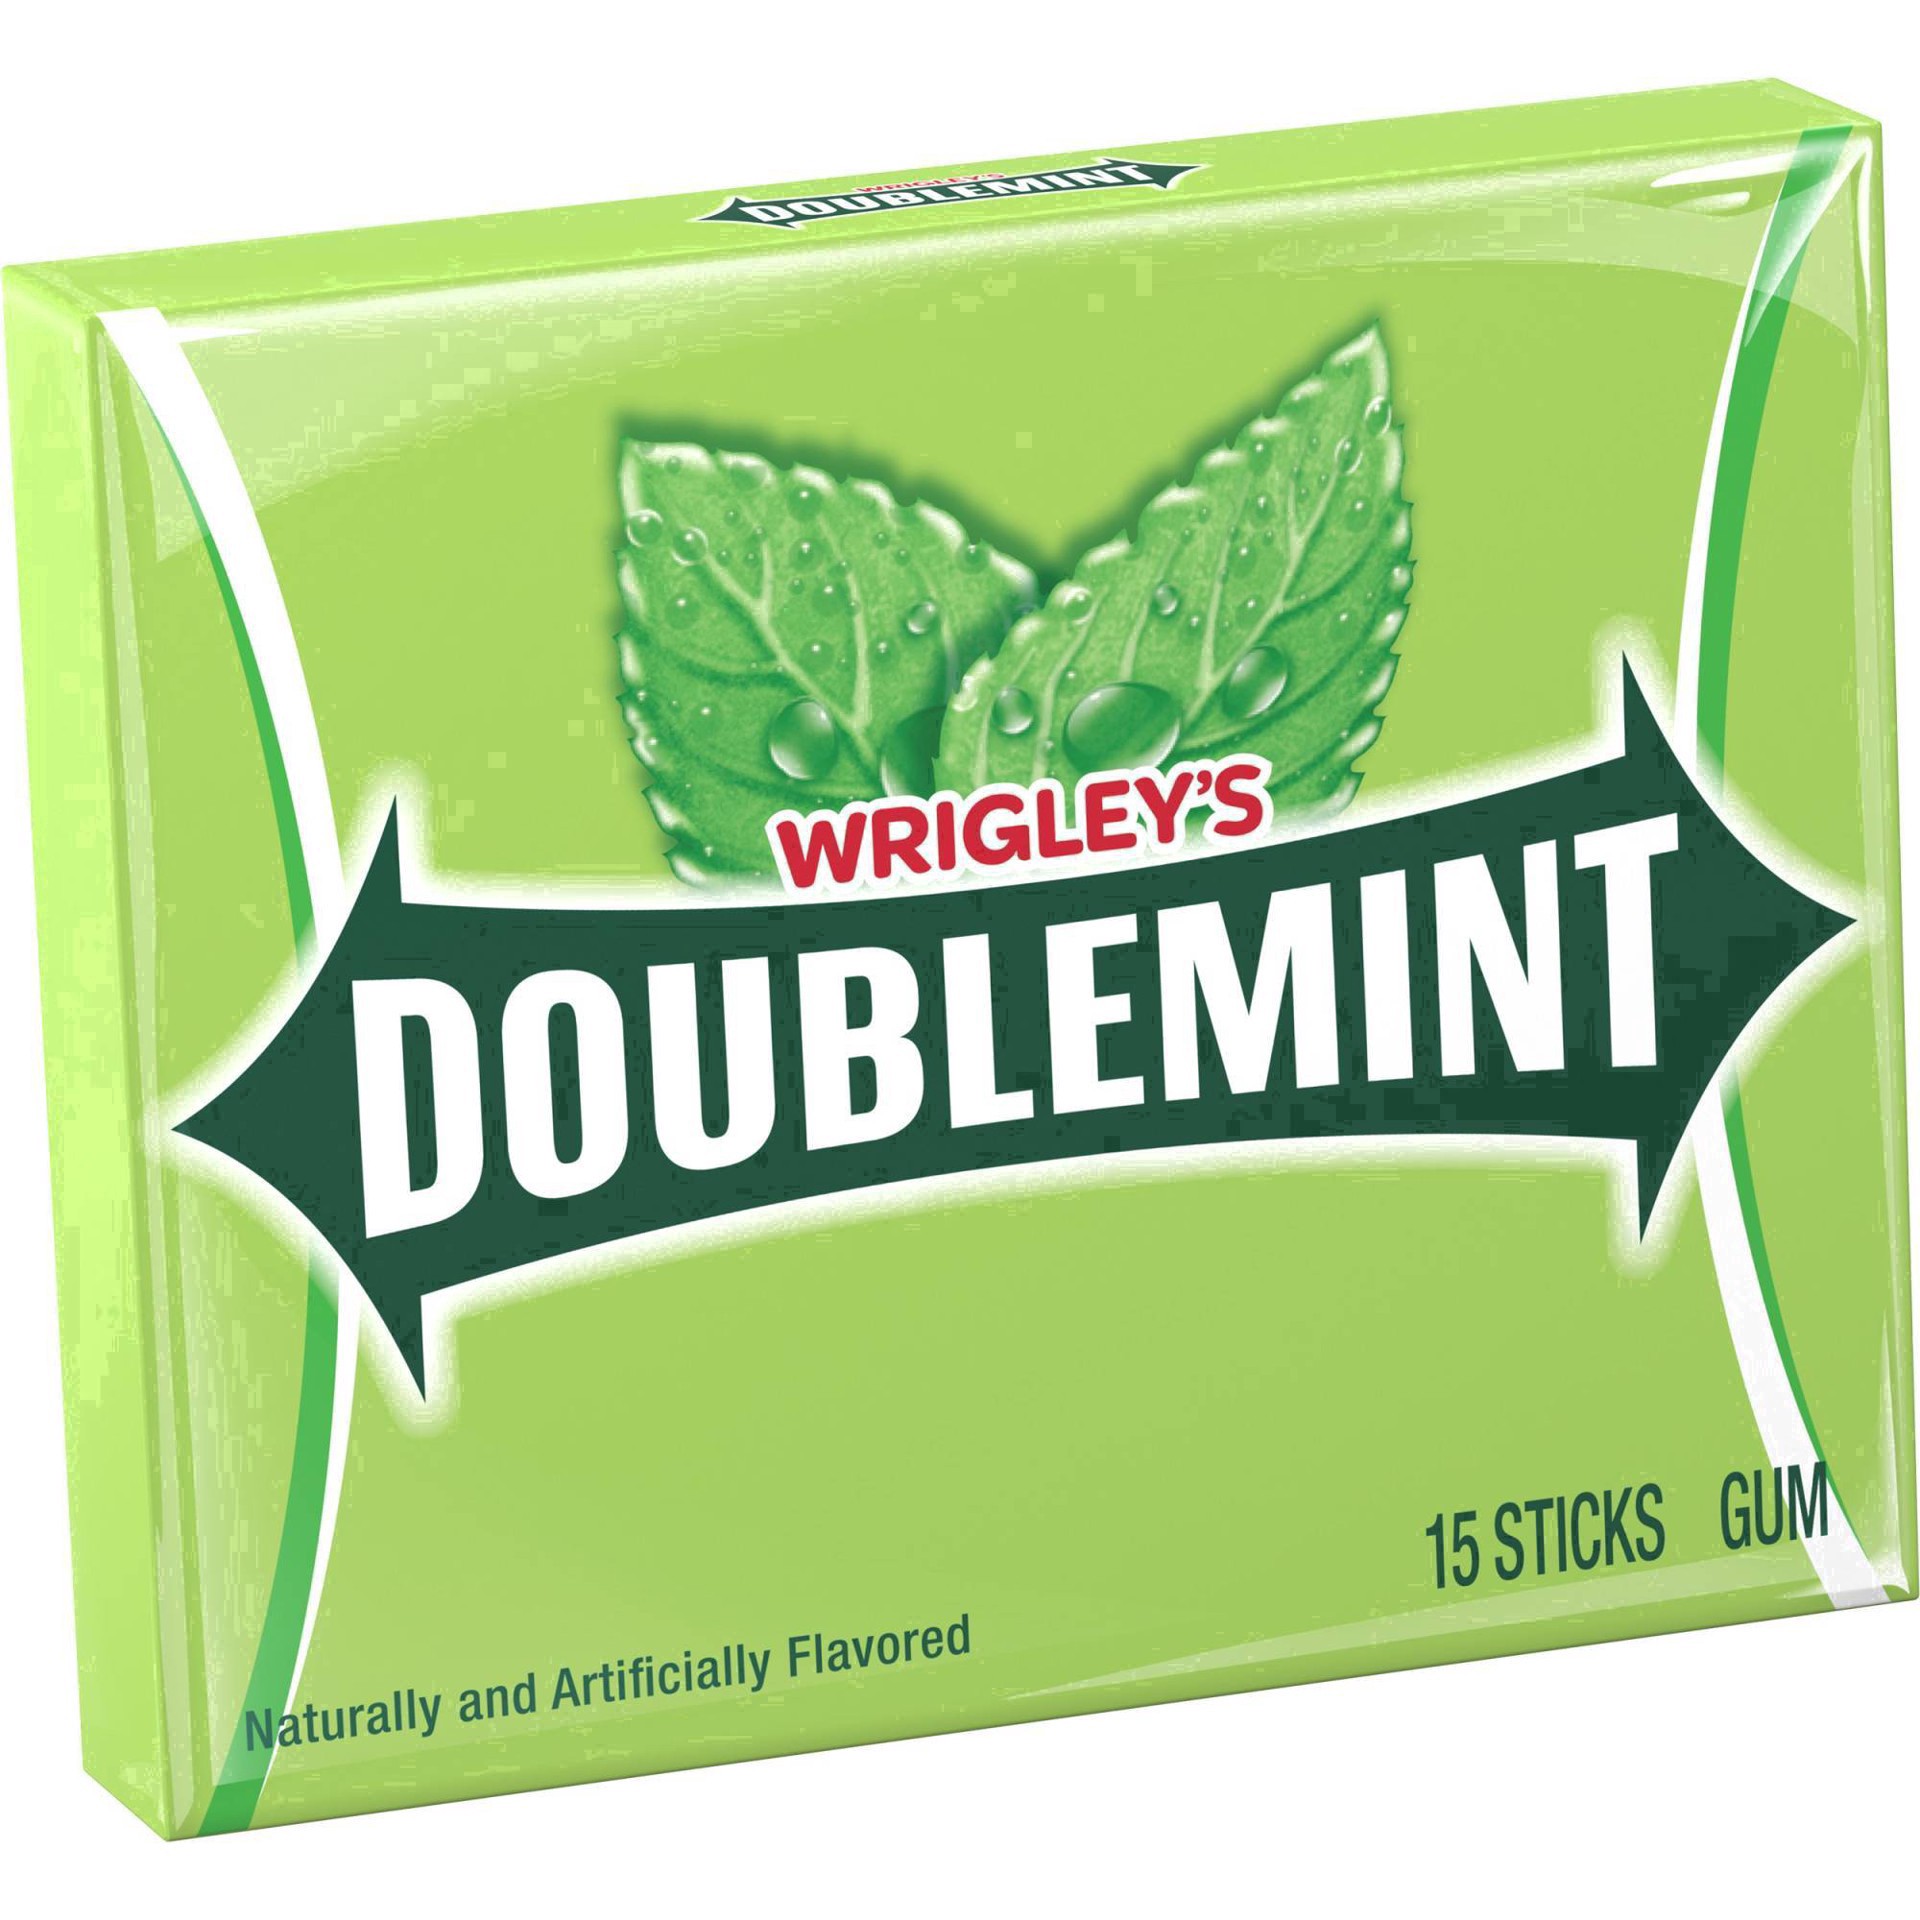 slide 29 of 134, Doublemint WRIGLEY'S DOUBLEMINT Bulk Chewing Gum, Value Pack, 15 ct (3 Pack), 45 ct